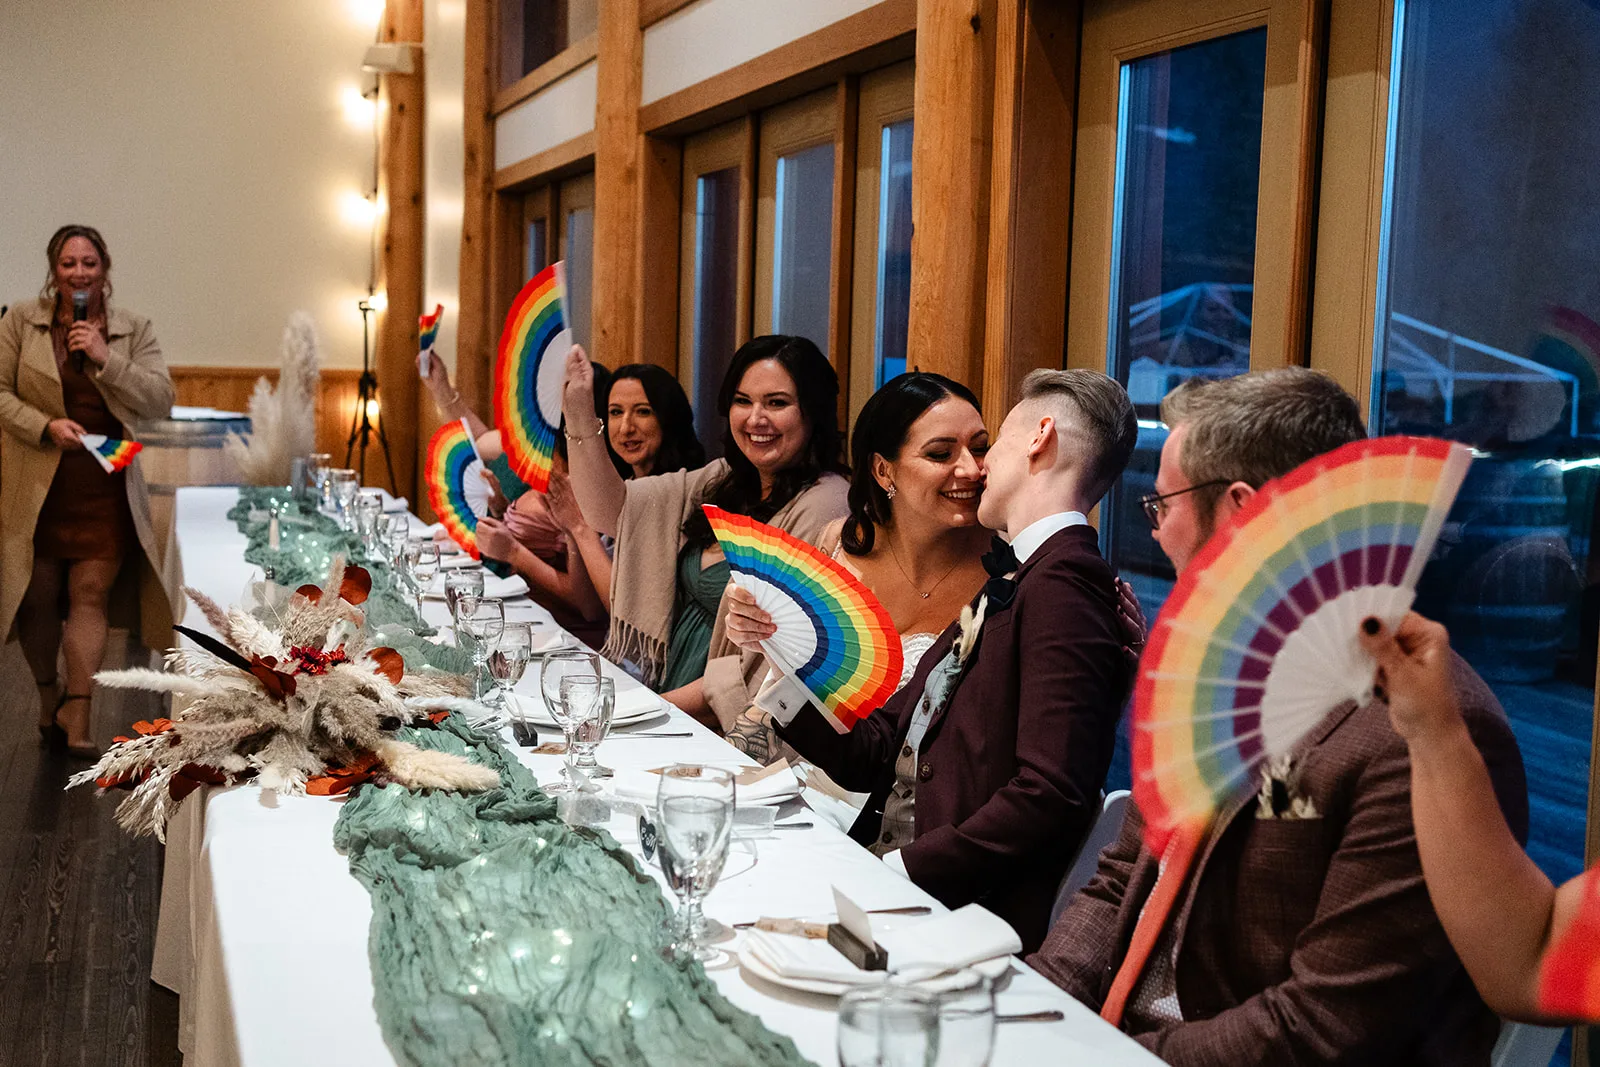 Megan and Claire celebrating with rainbow fans at their reception, Kaitlin Day Photos